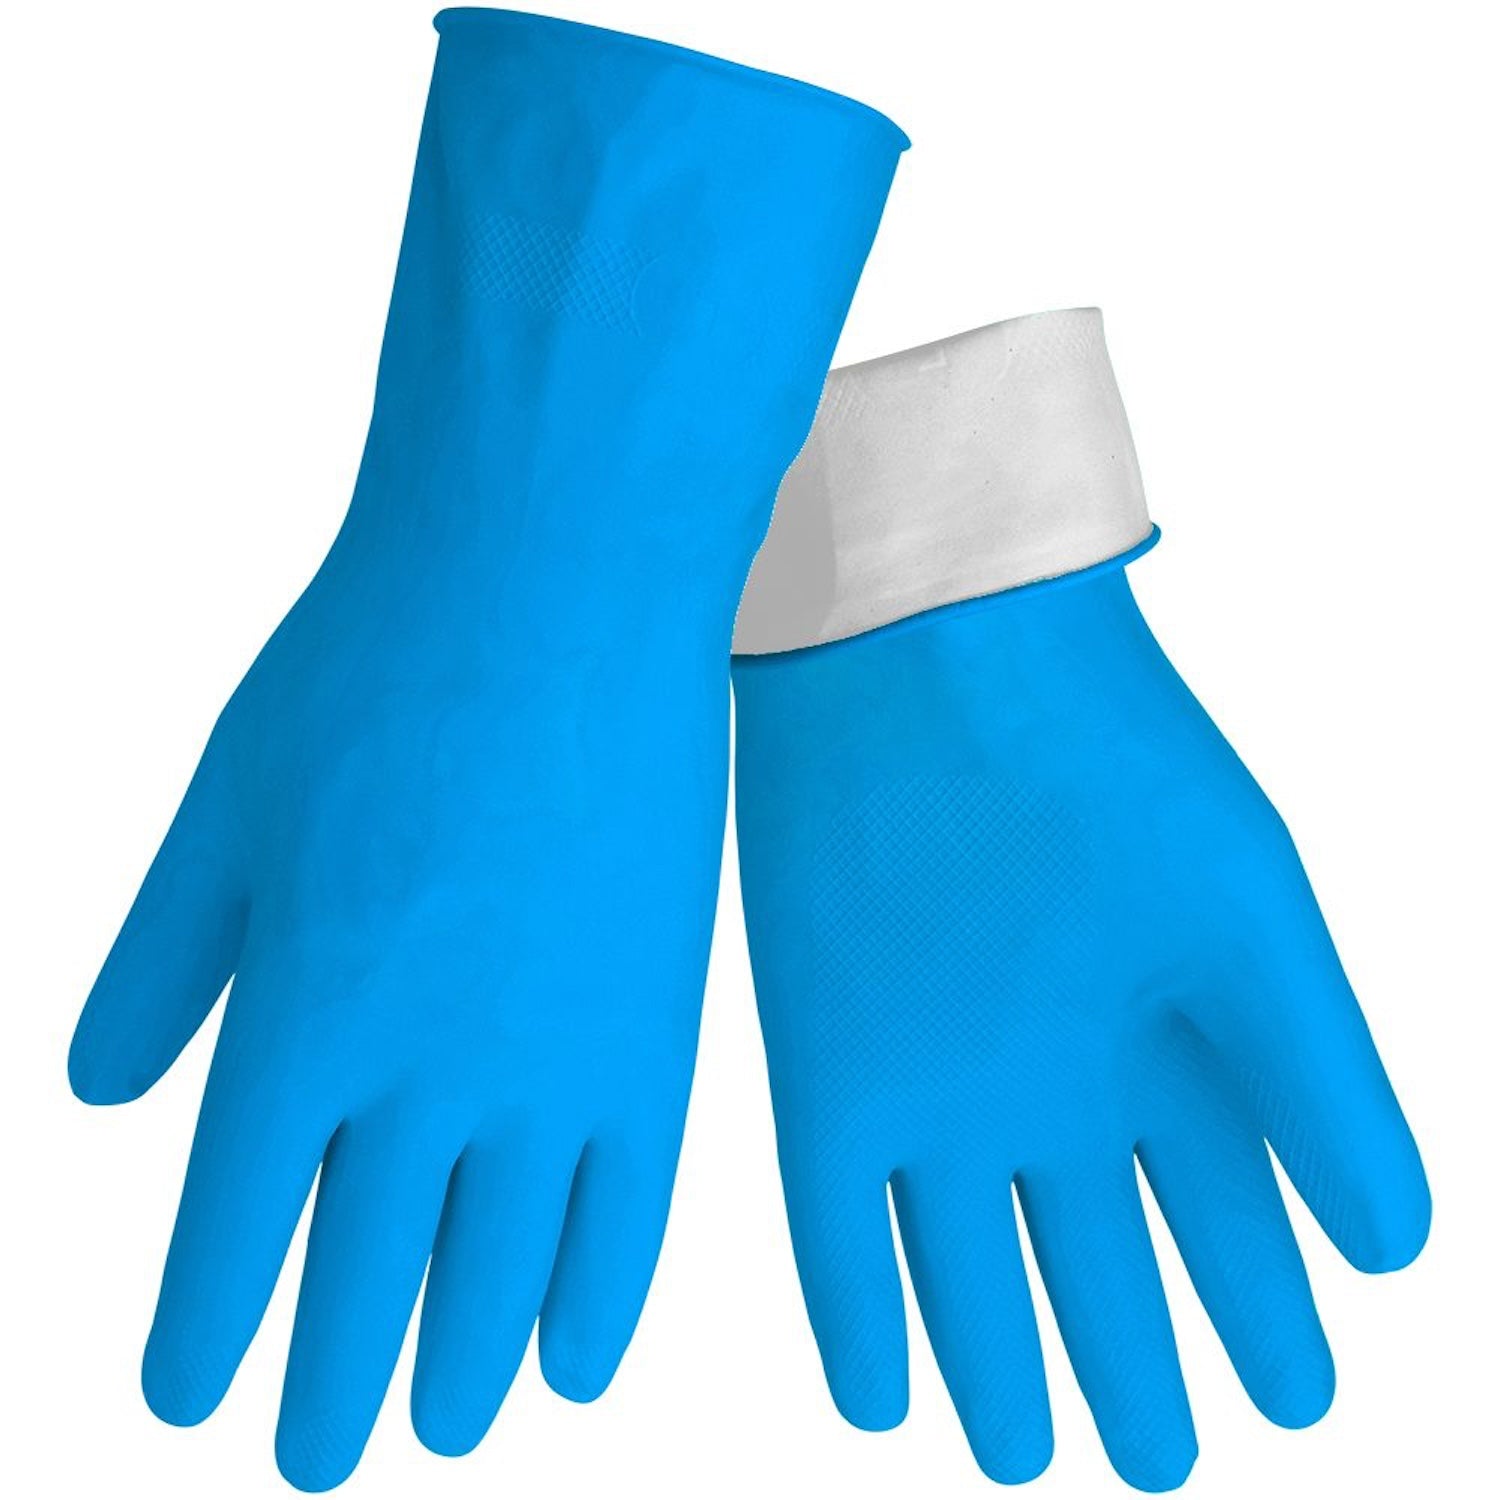 KleenMe Domestic Gloves | Blue | Small | Single & KleenMe Domestic Gloves | Blue | Medium | Single